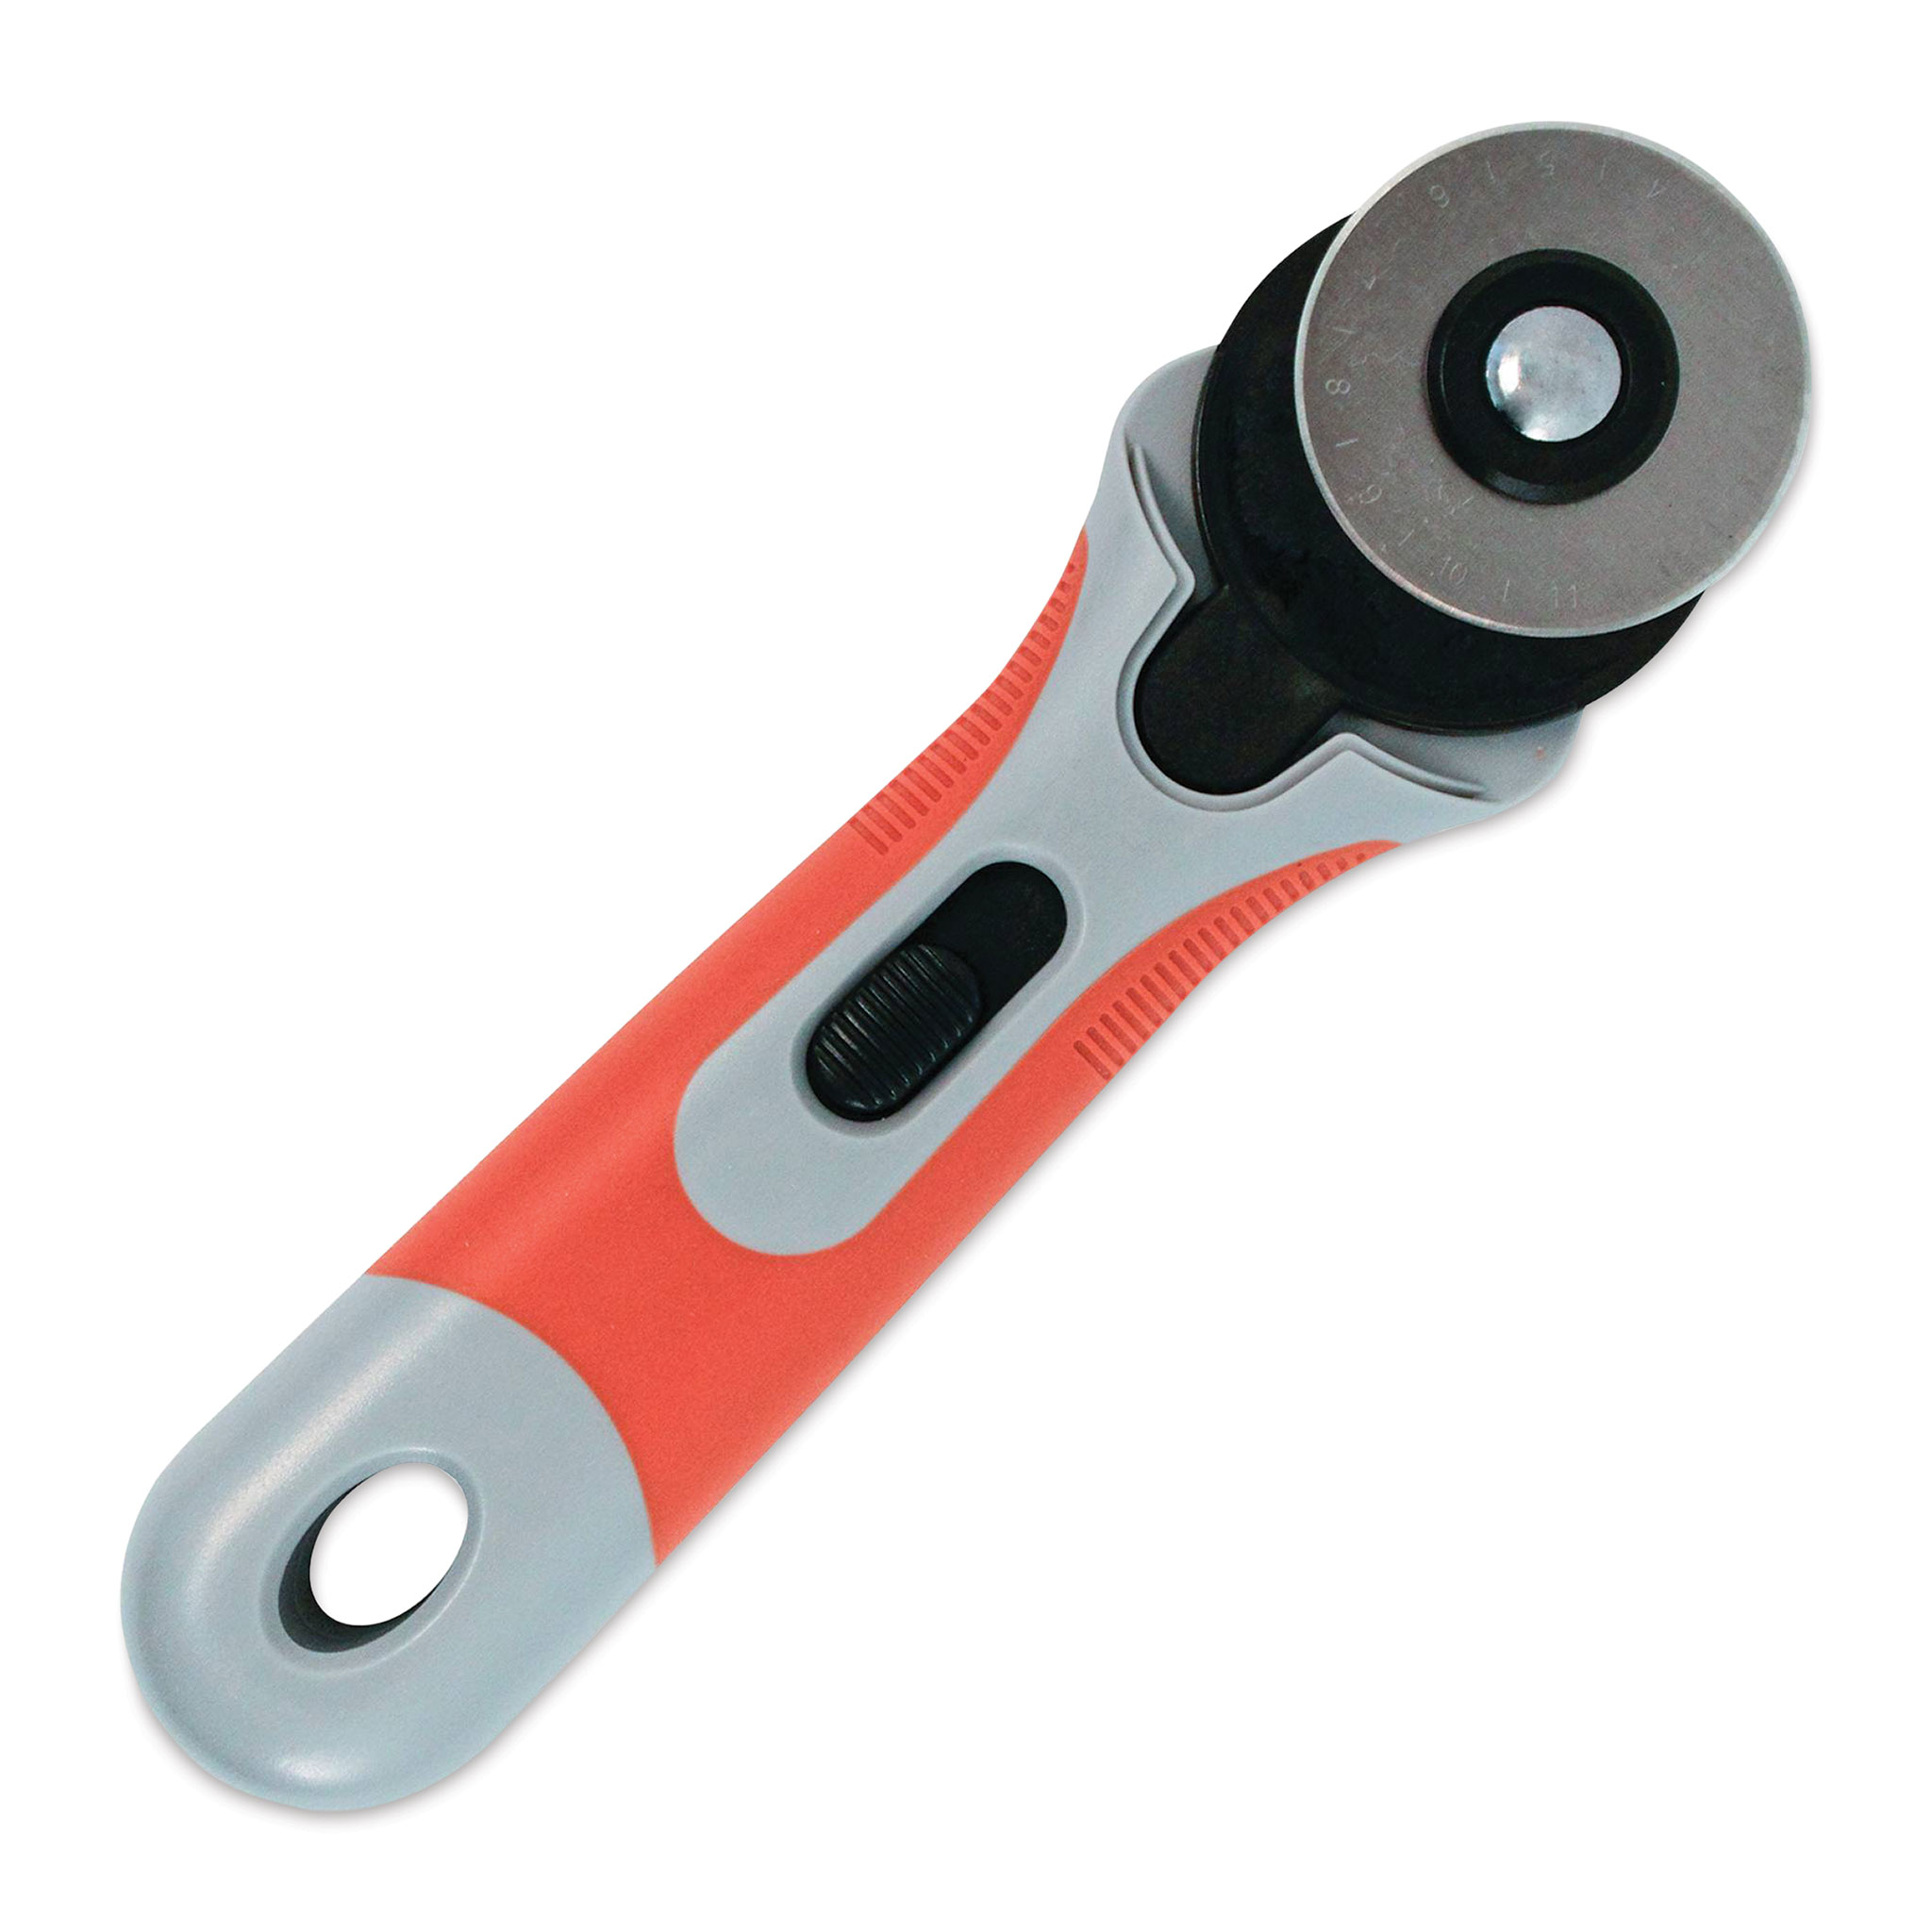 Realeather Leather Rotary Cutter and Blades